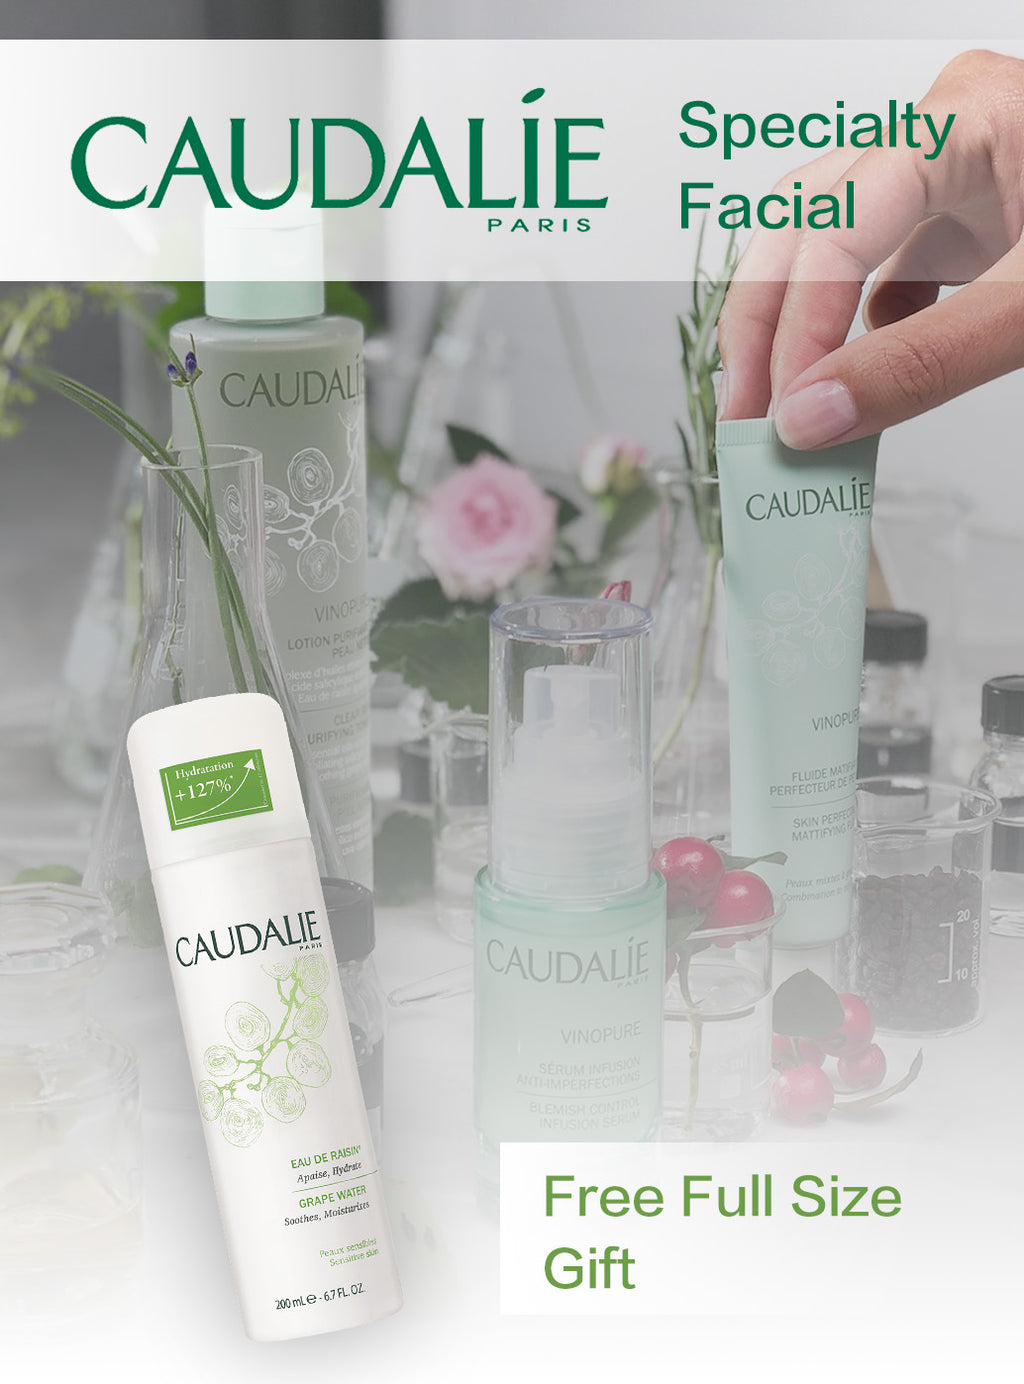 Caudalie Luxury Specialty Facial + Full Size Gift